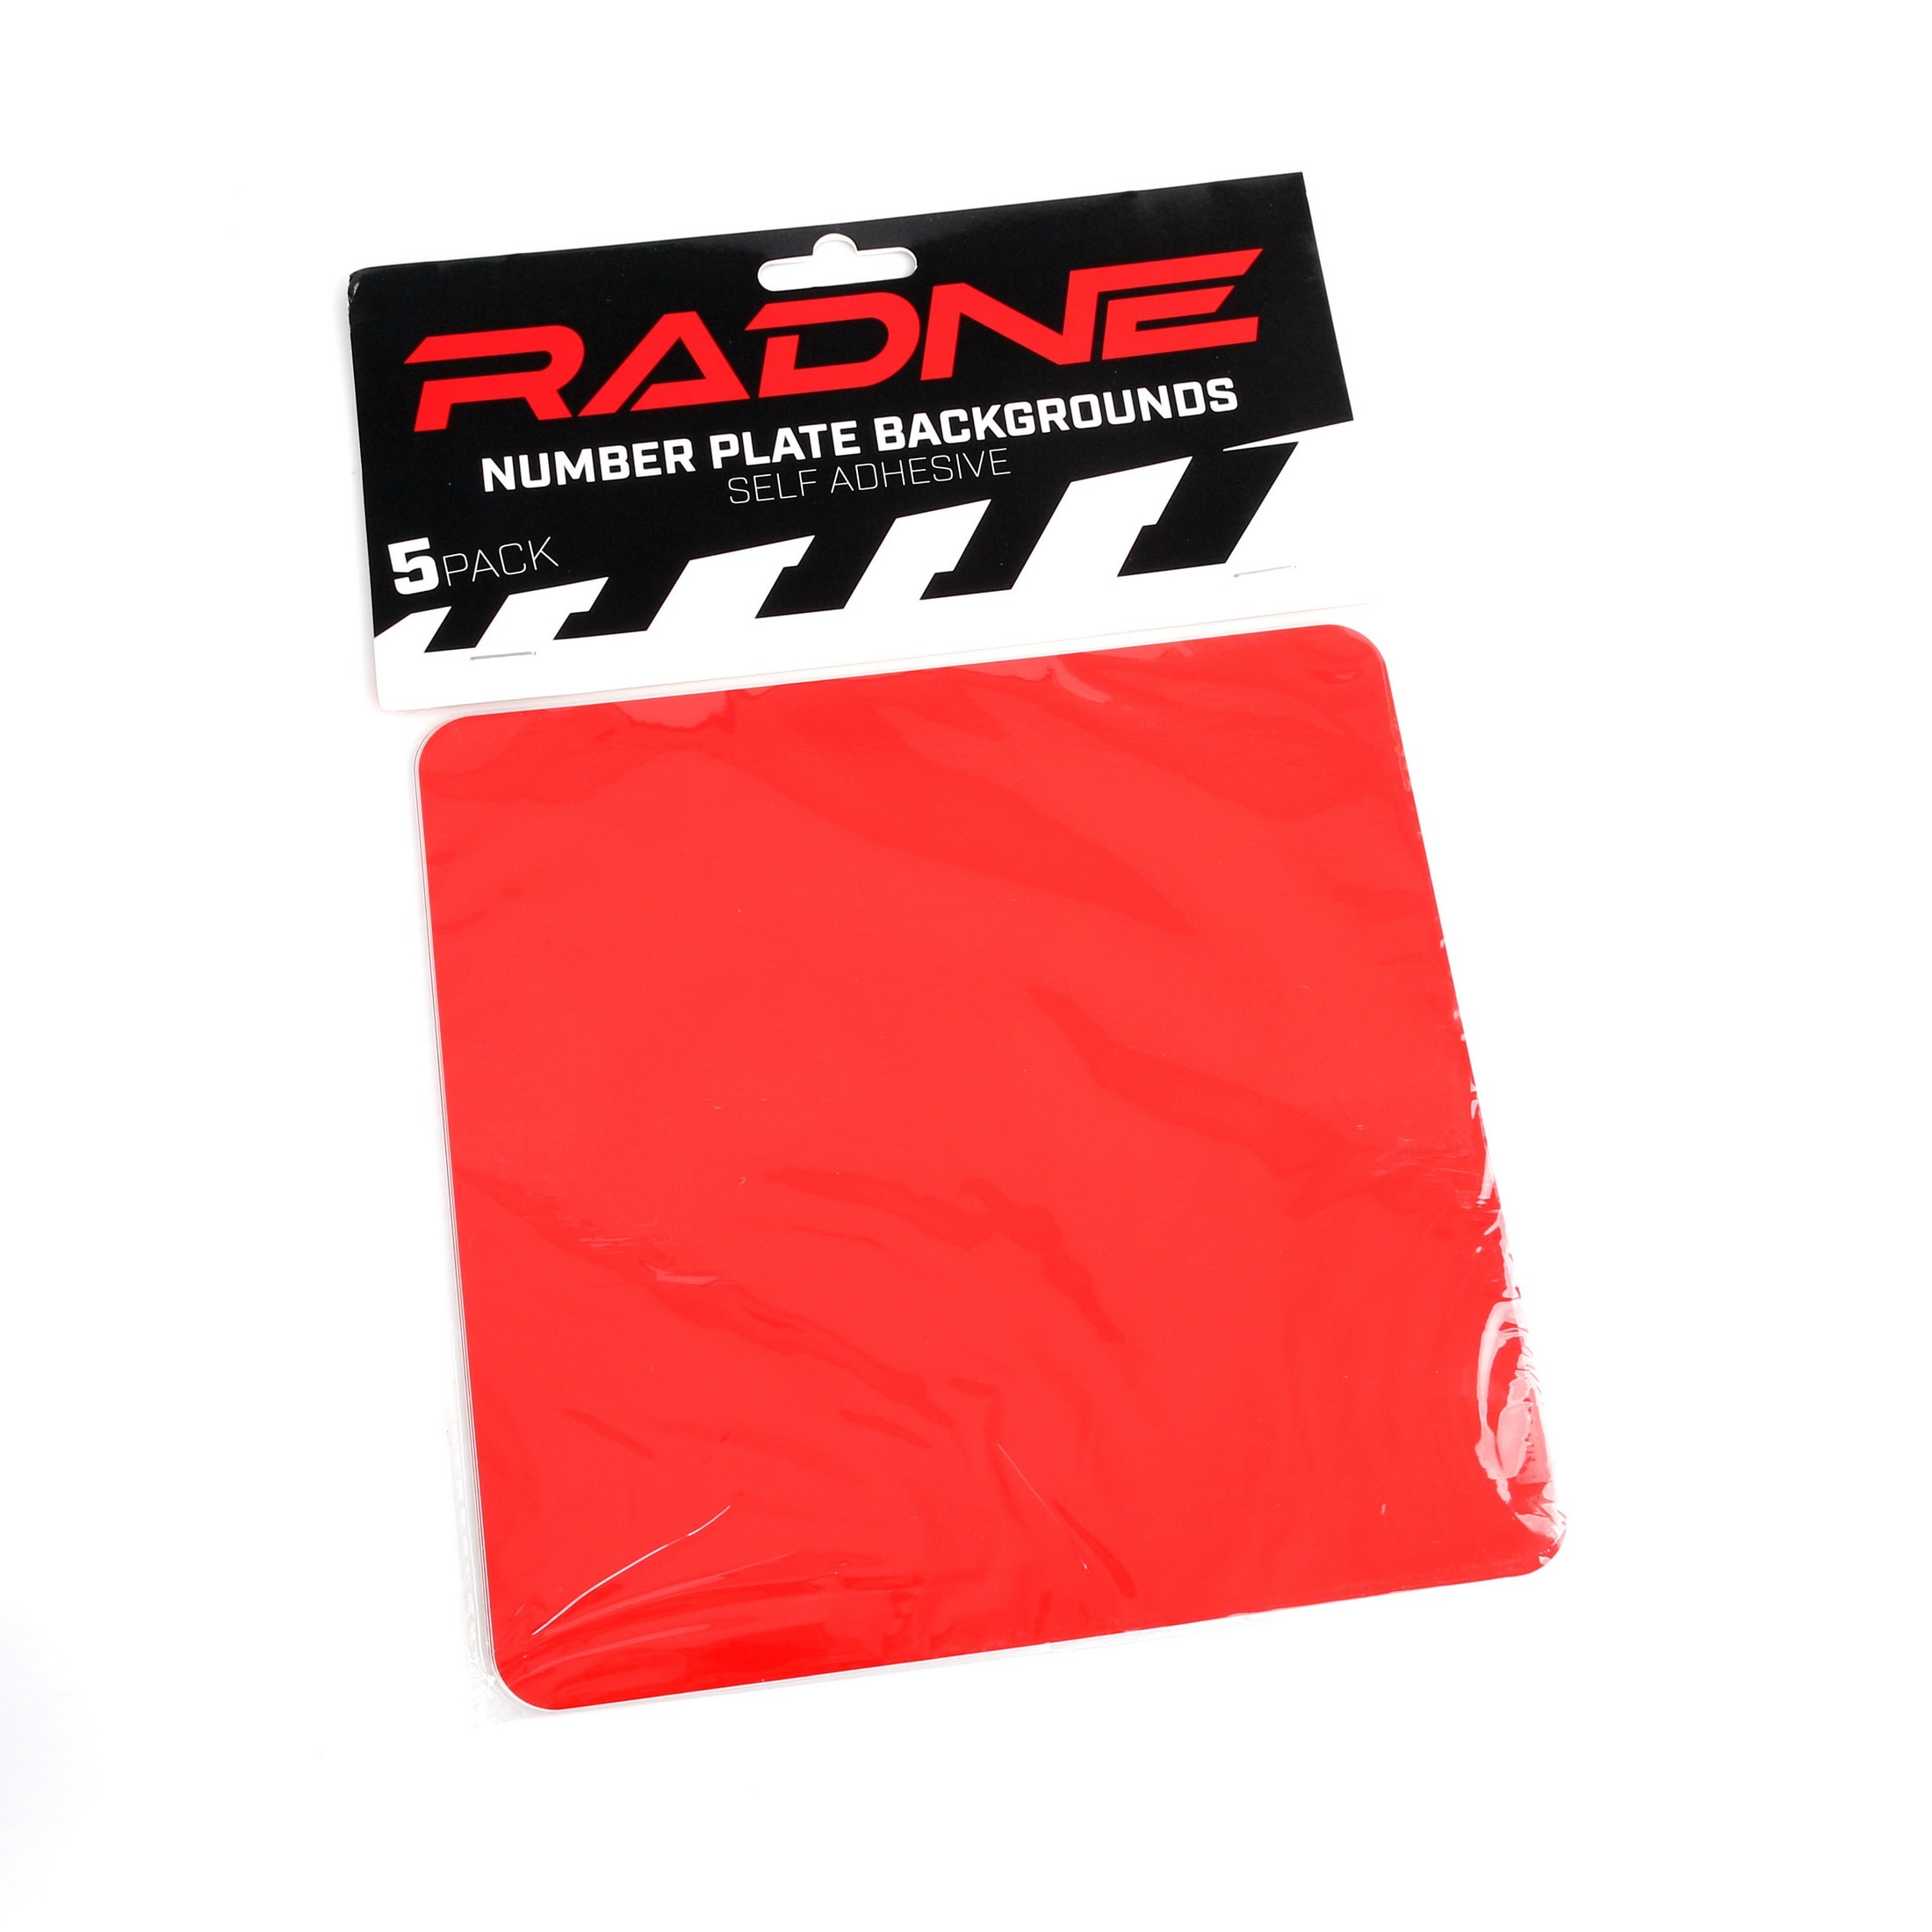 Number plate self-adhesive 5-pack Red